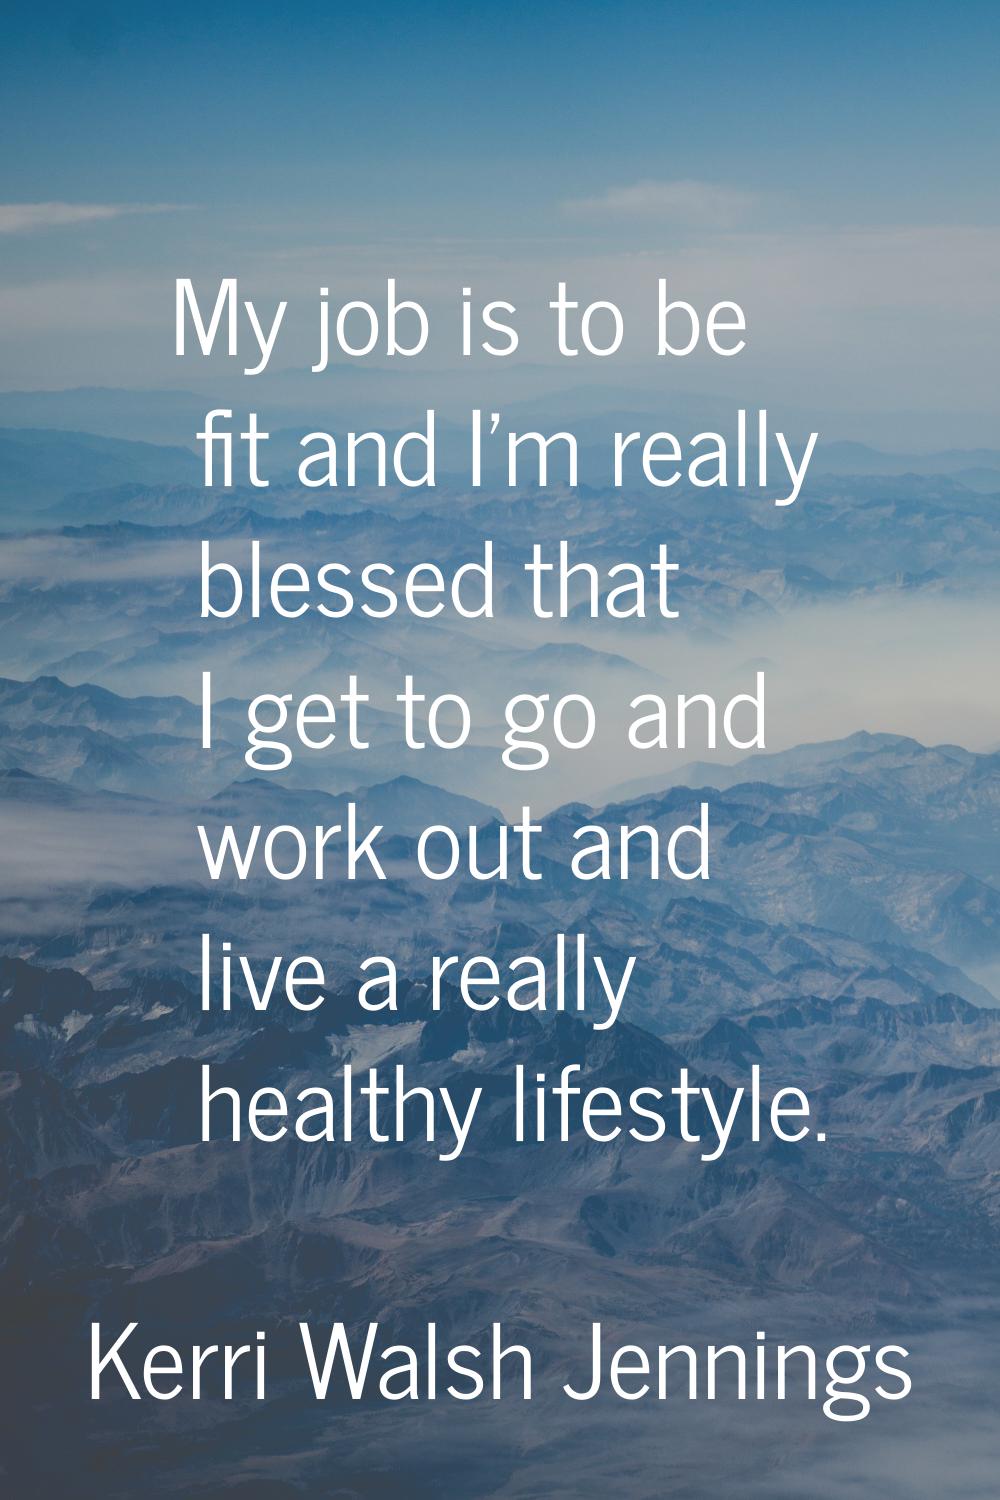 My job is to be fit and I'm really blessed that I get to go and work out and live a really healthy 